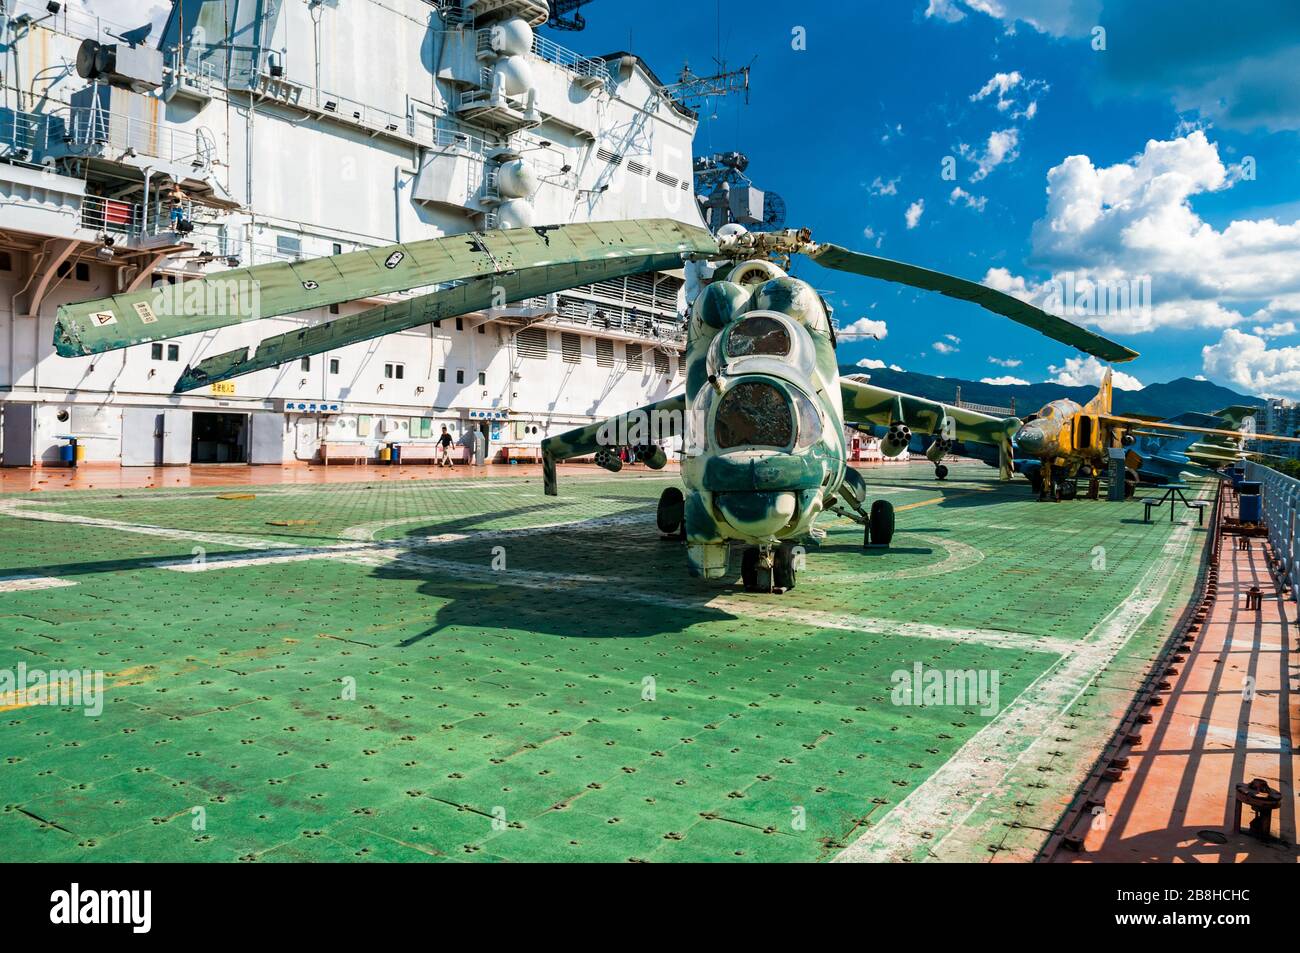 Mil attack helicopter Hind on the flight deck of the Minsk aircraft carrier in Shenzhen. MiG-23 in background. Stock Photo